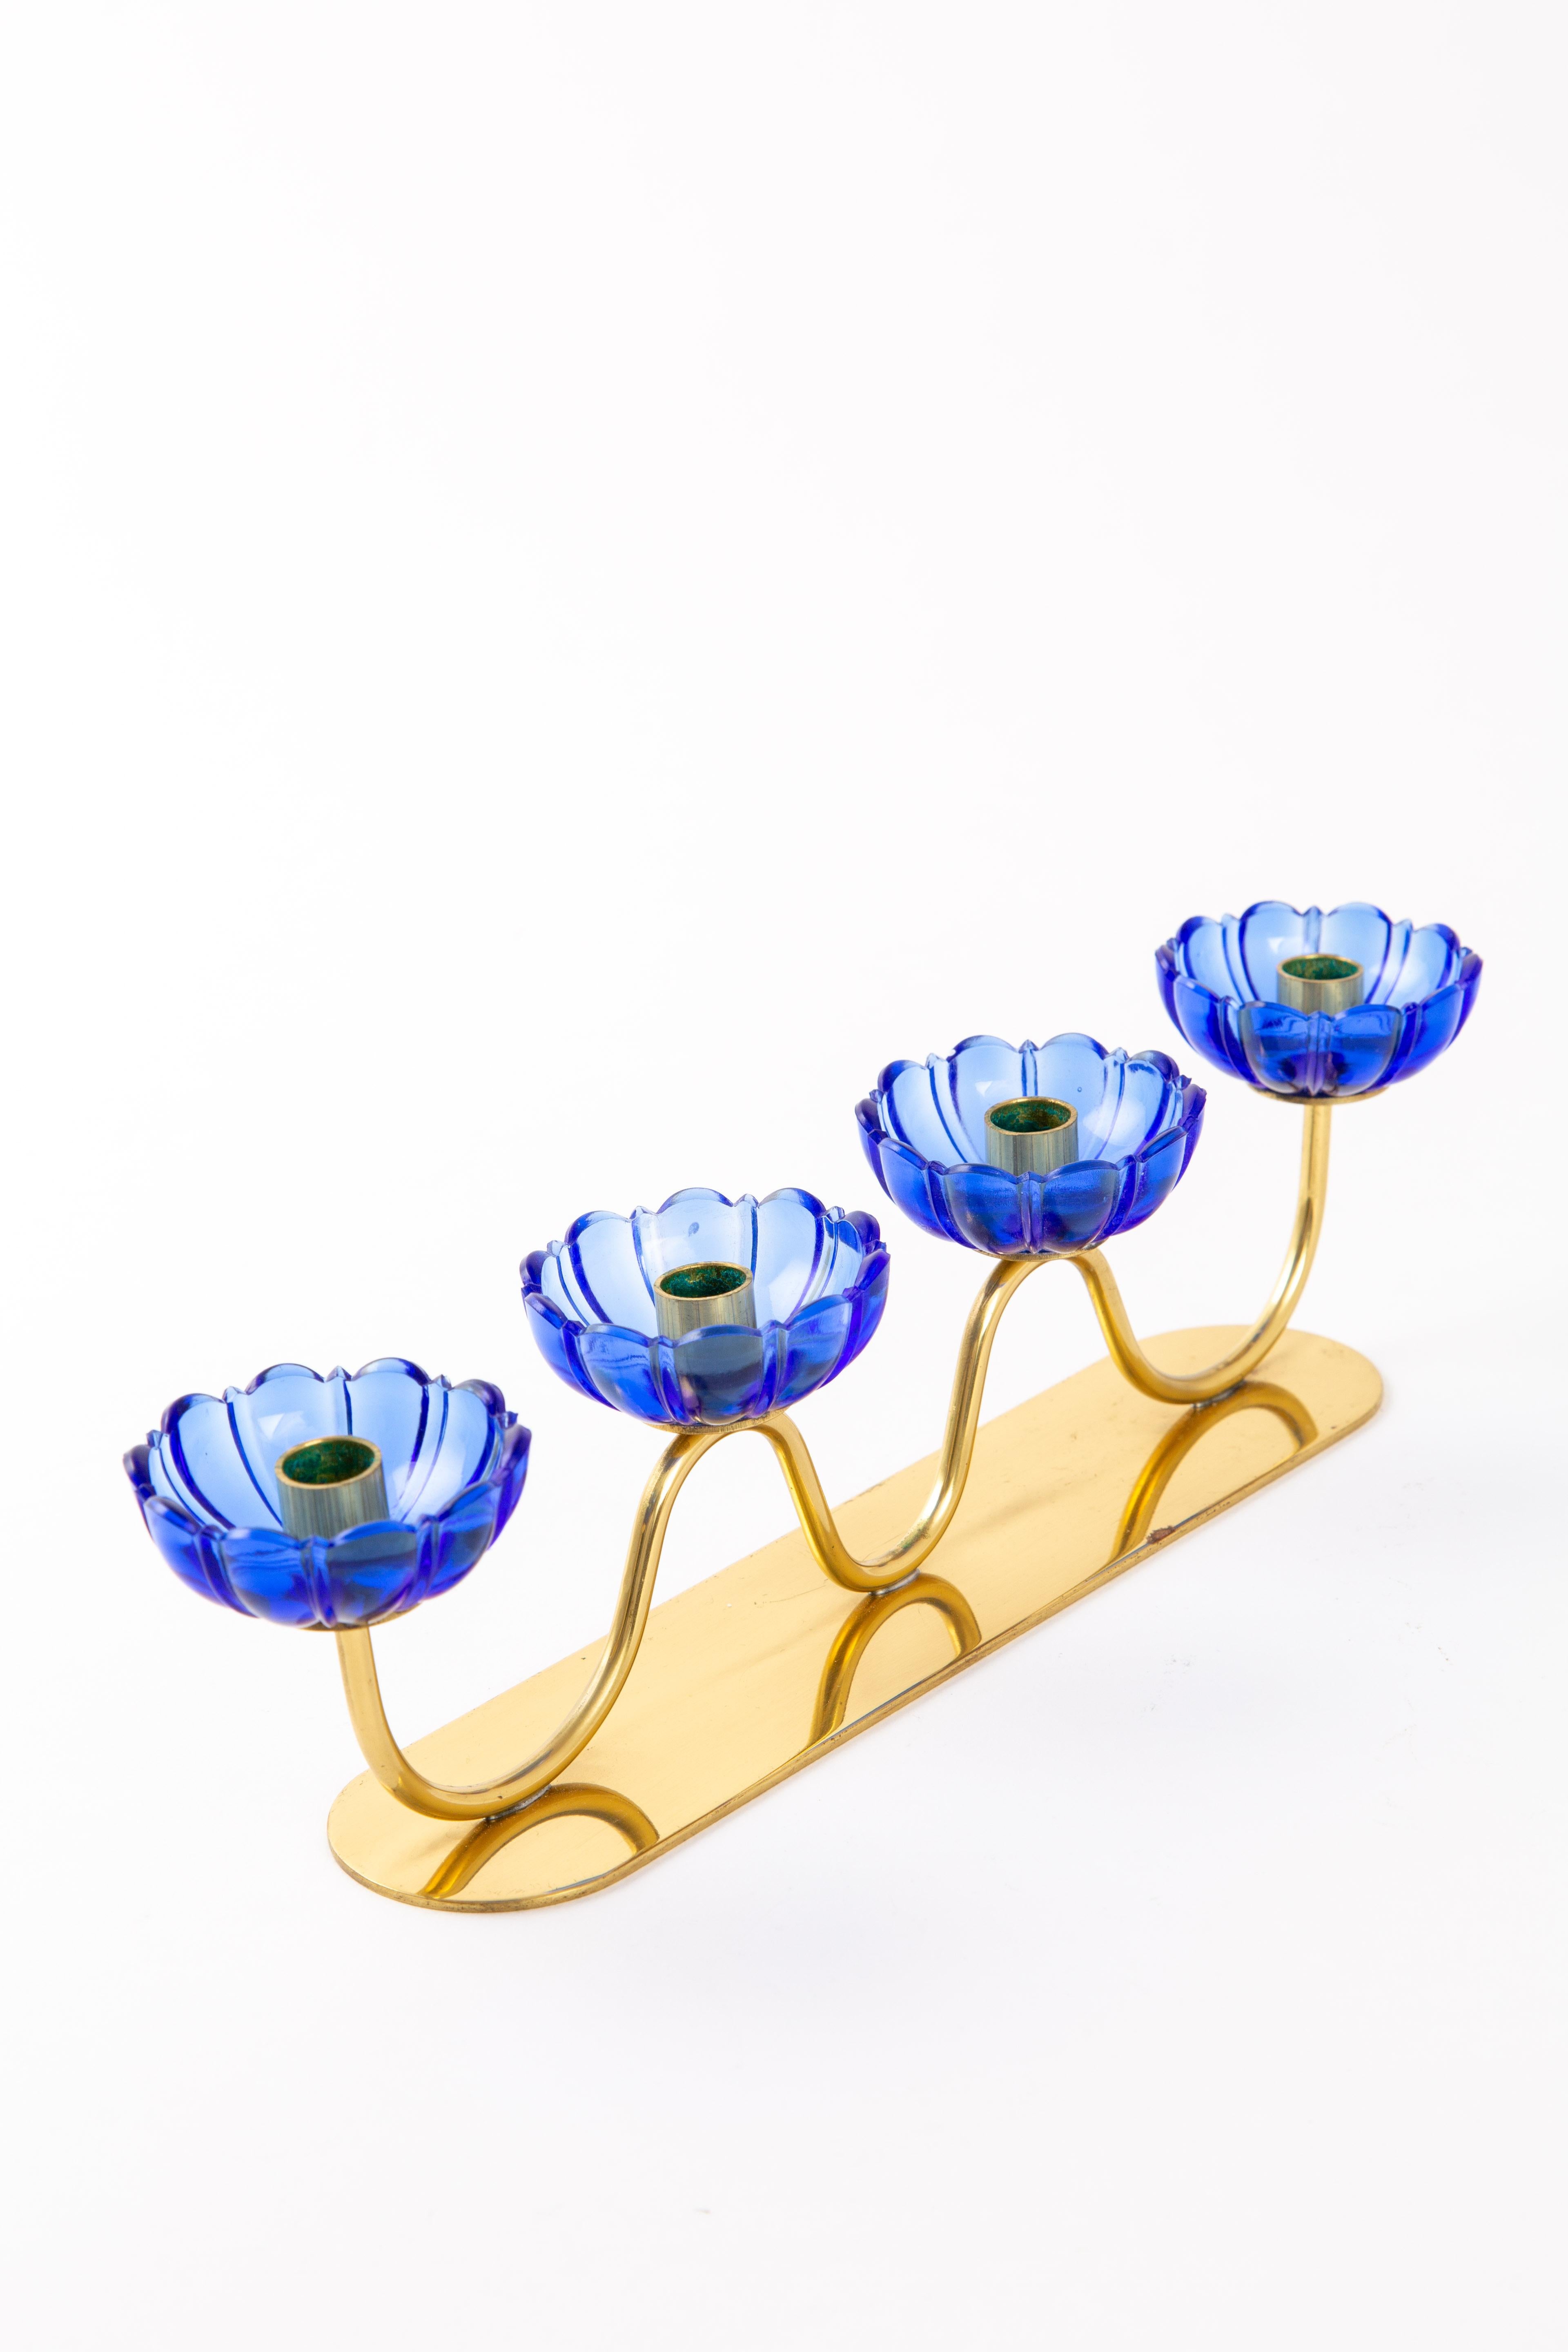 Gunnar Ander Candleholders Sweden for Ystad Metall, Blue Flower with Brass For Sale 6